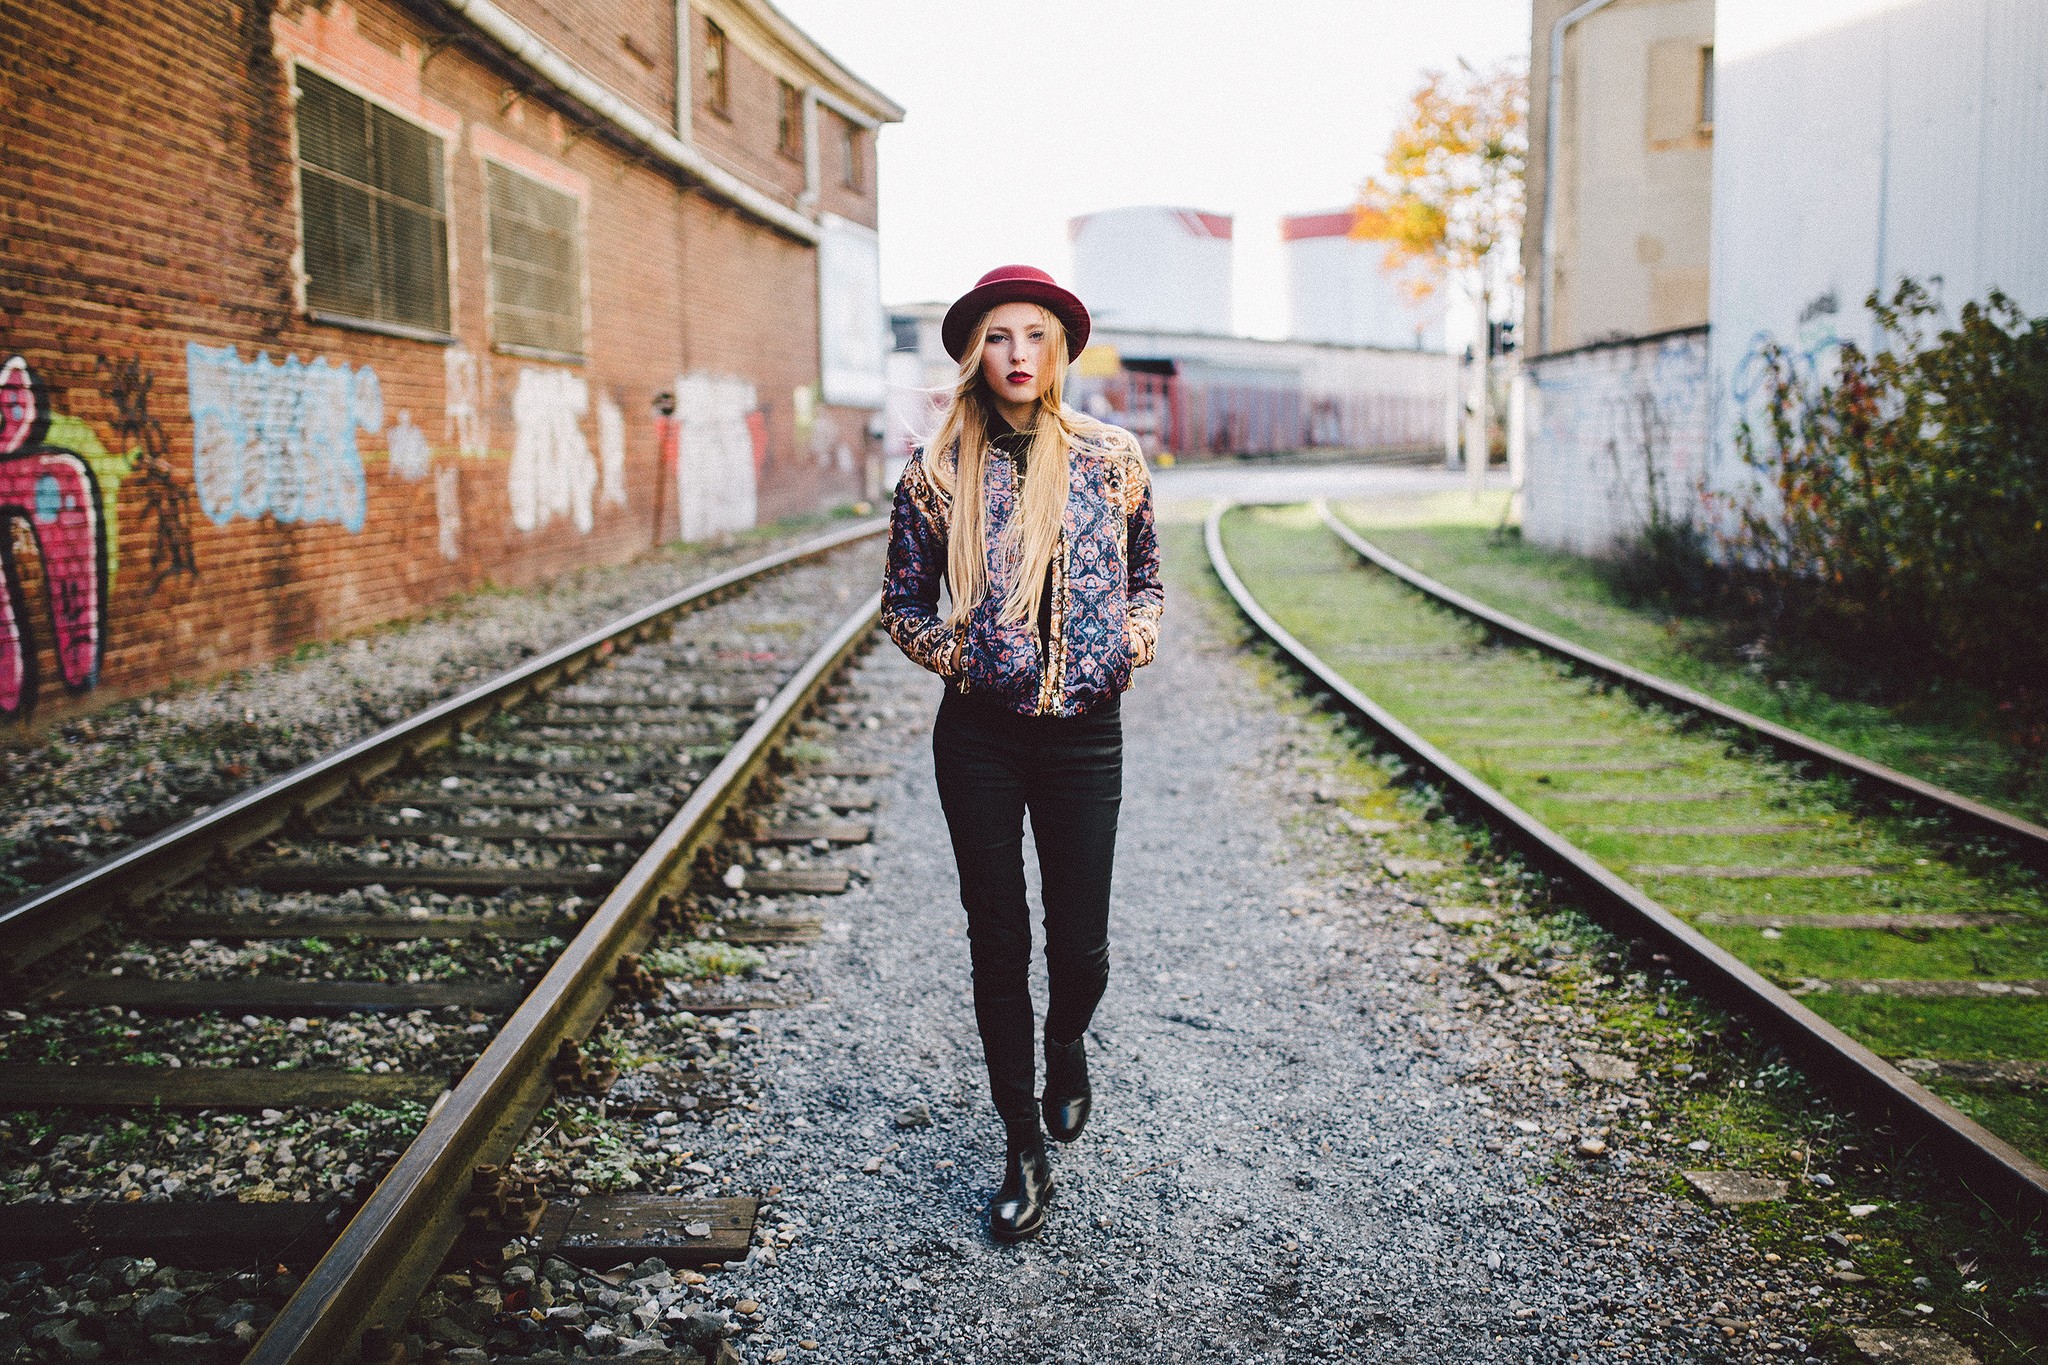 Women Blonde Hat Red Lipstick Walking Railway Looking At Viewer Women Outdoors Hands In Pockets Wome 2048x1365